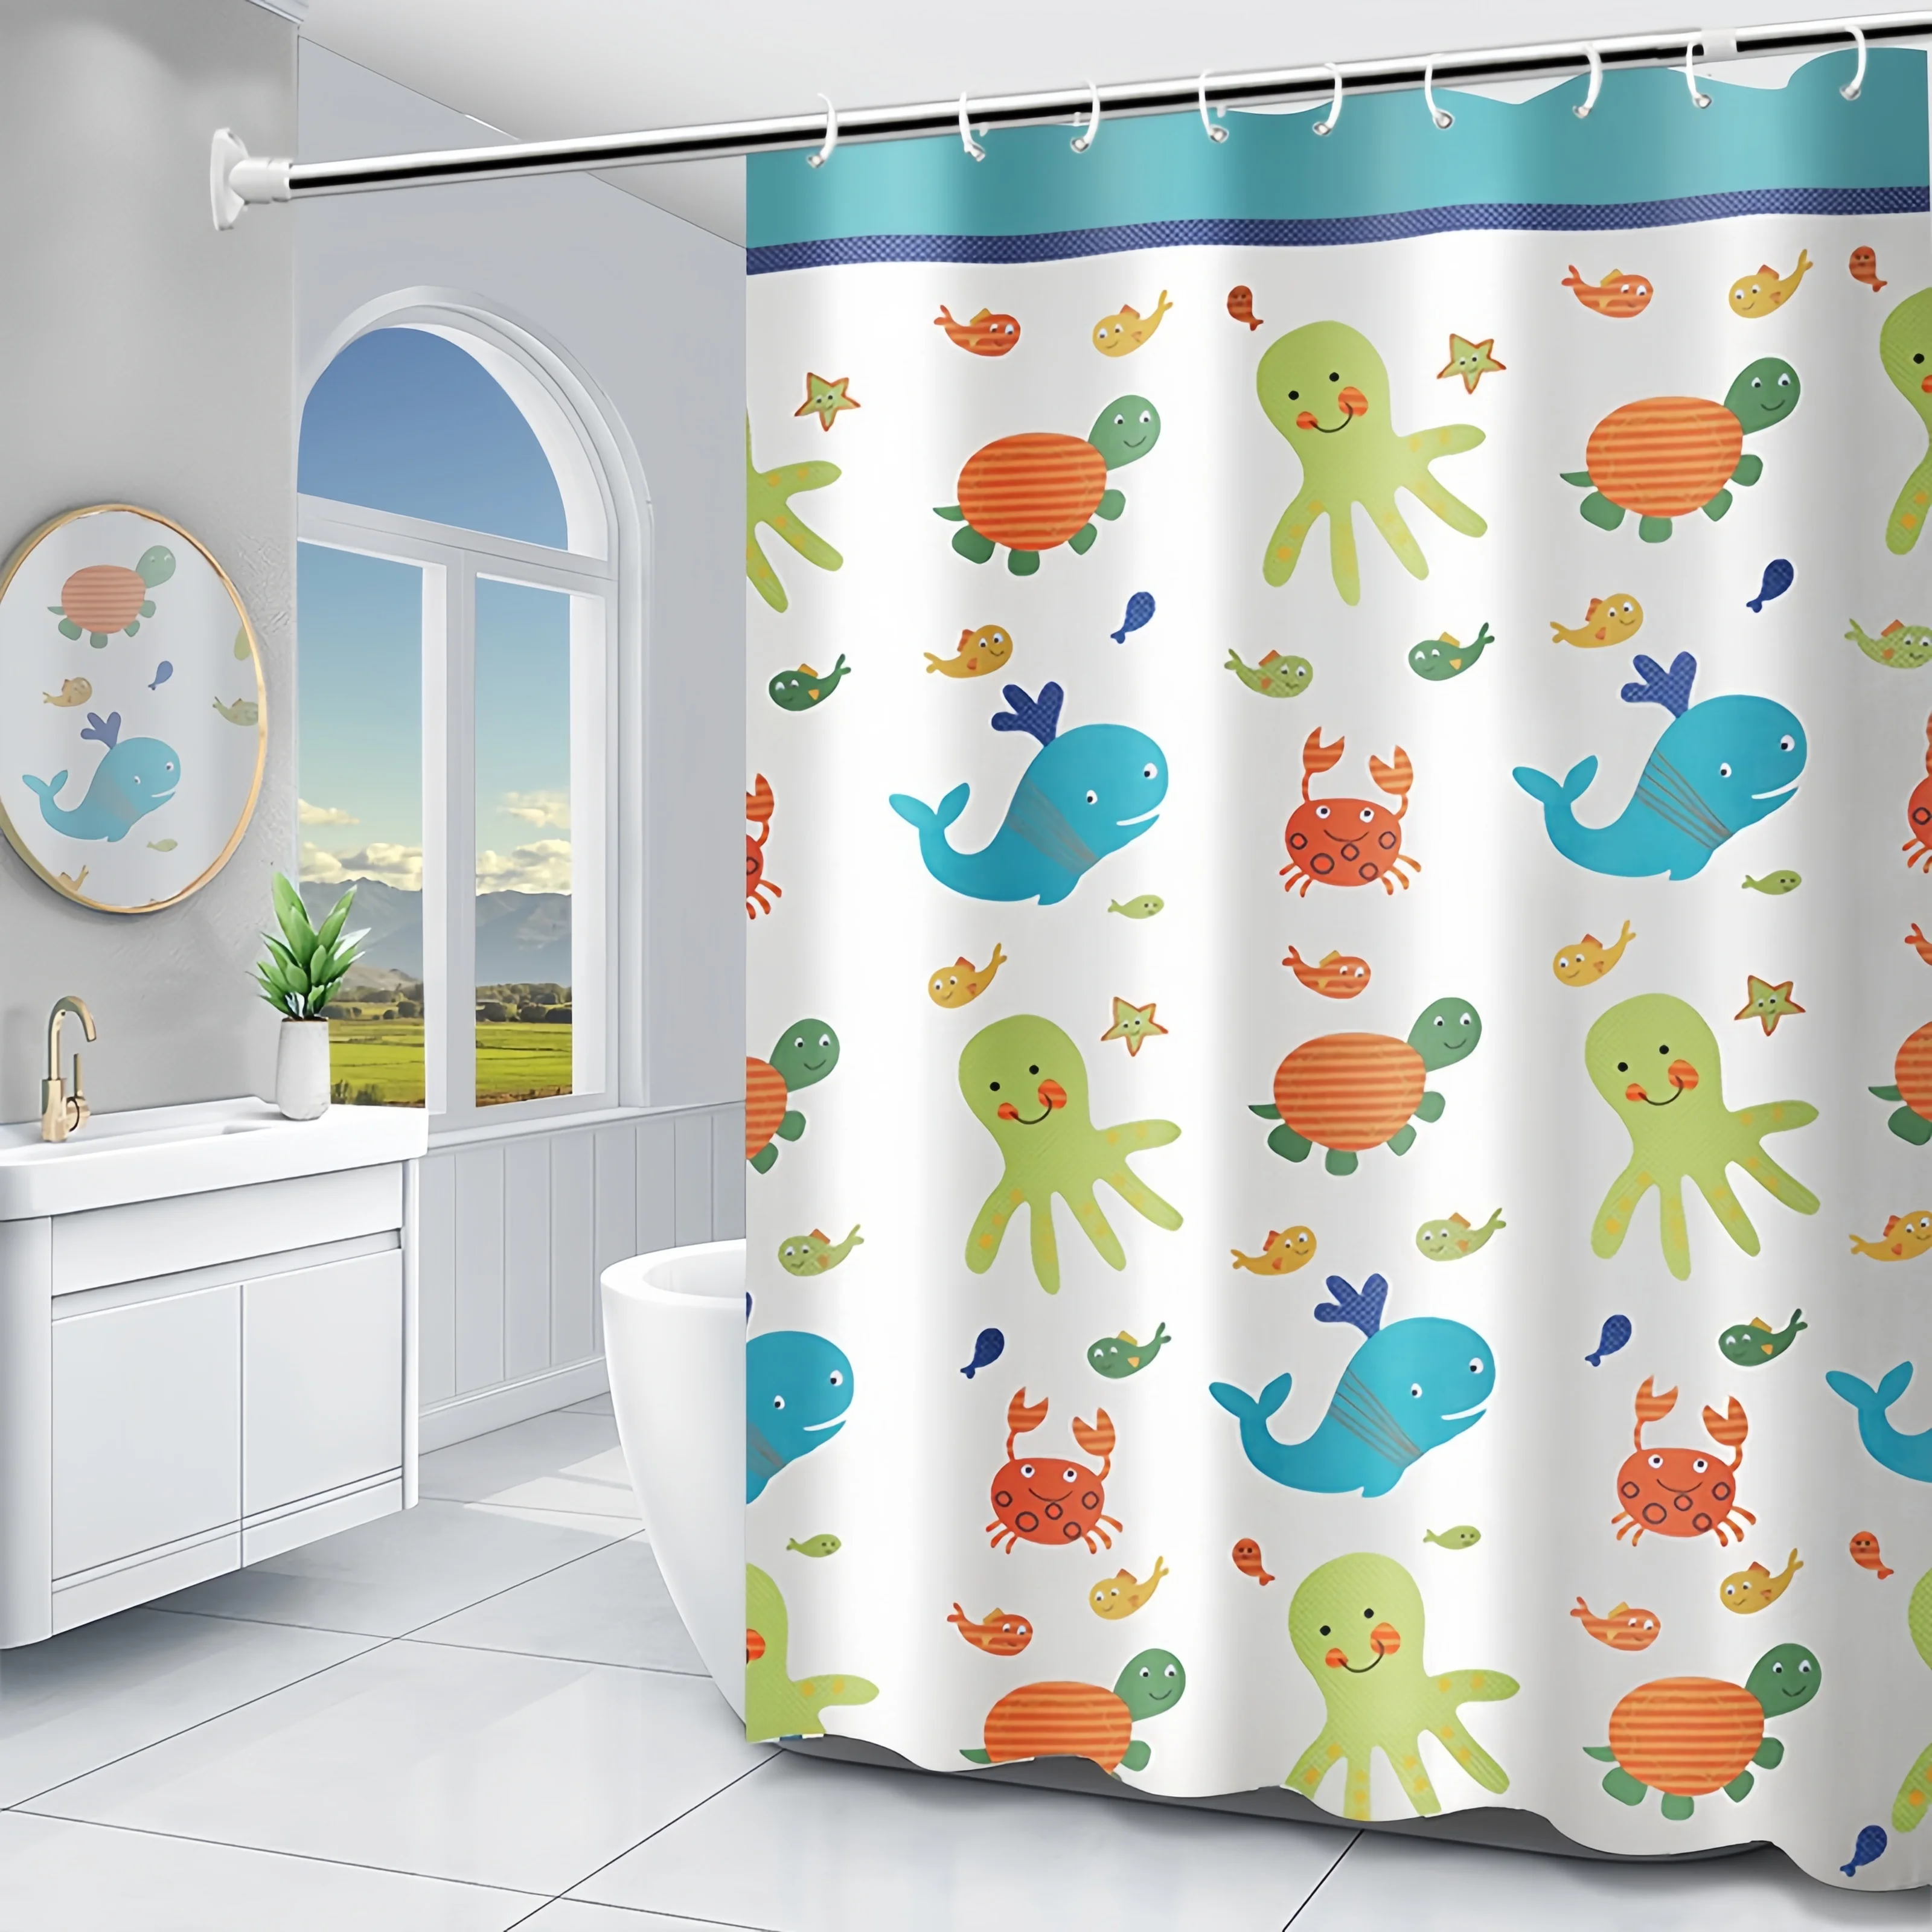 

1 Piece Small Fresh Cartoon Sea Creature Waterproof and Mildew Resistant Bathroom Partition Curtain Free 12 Hooks, 72" x 72"